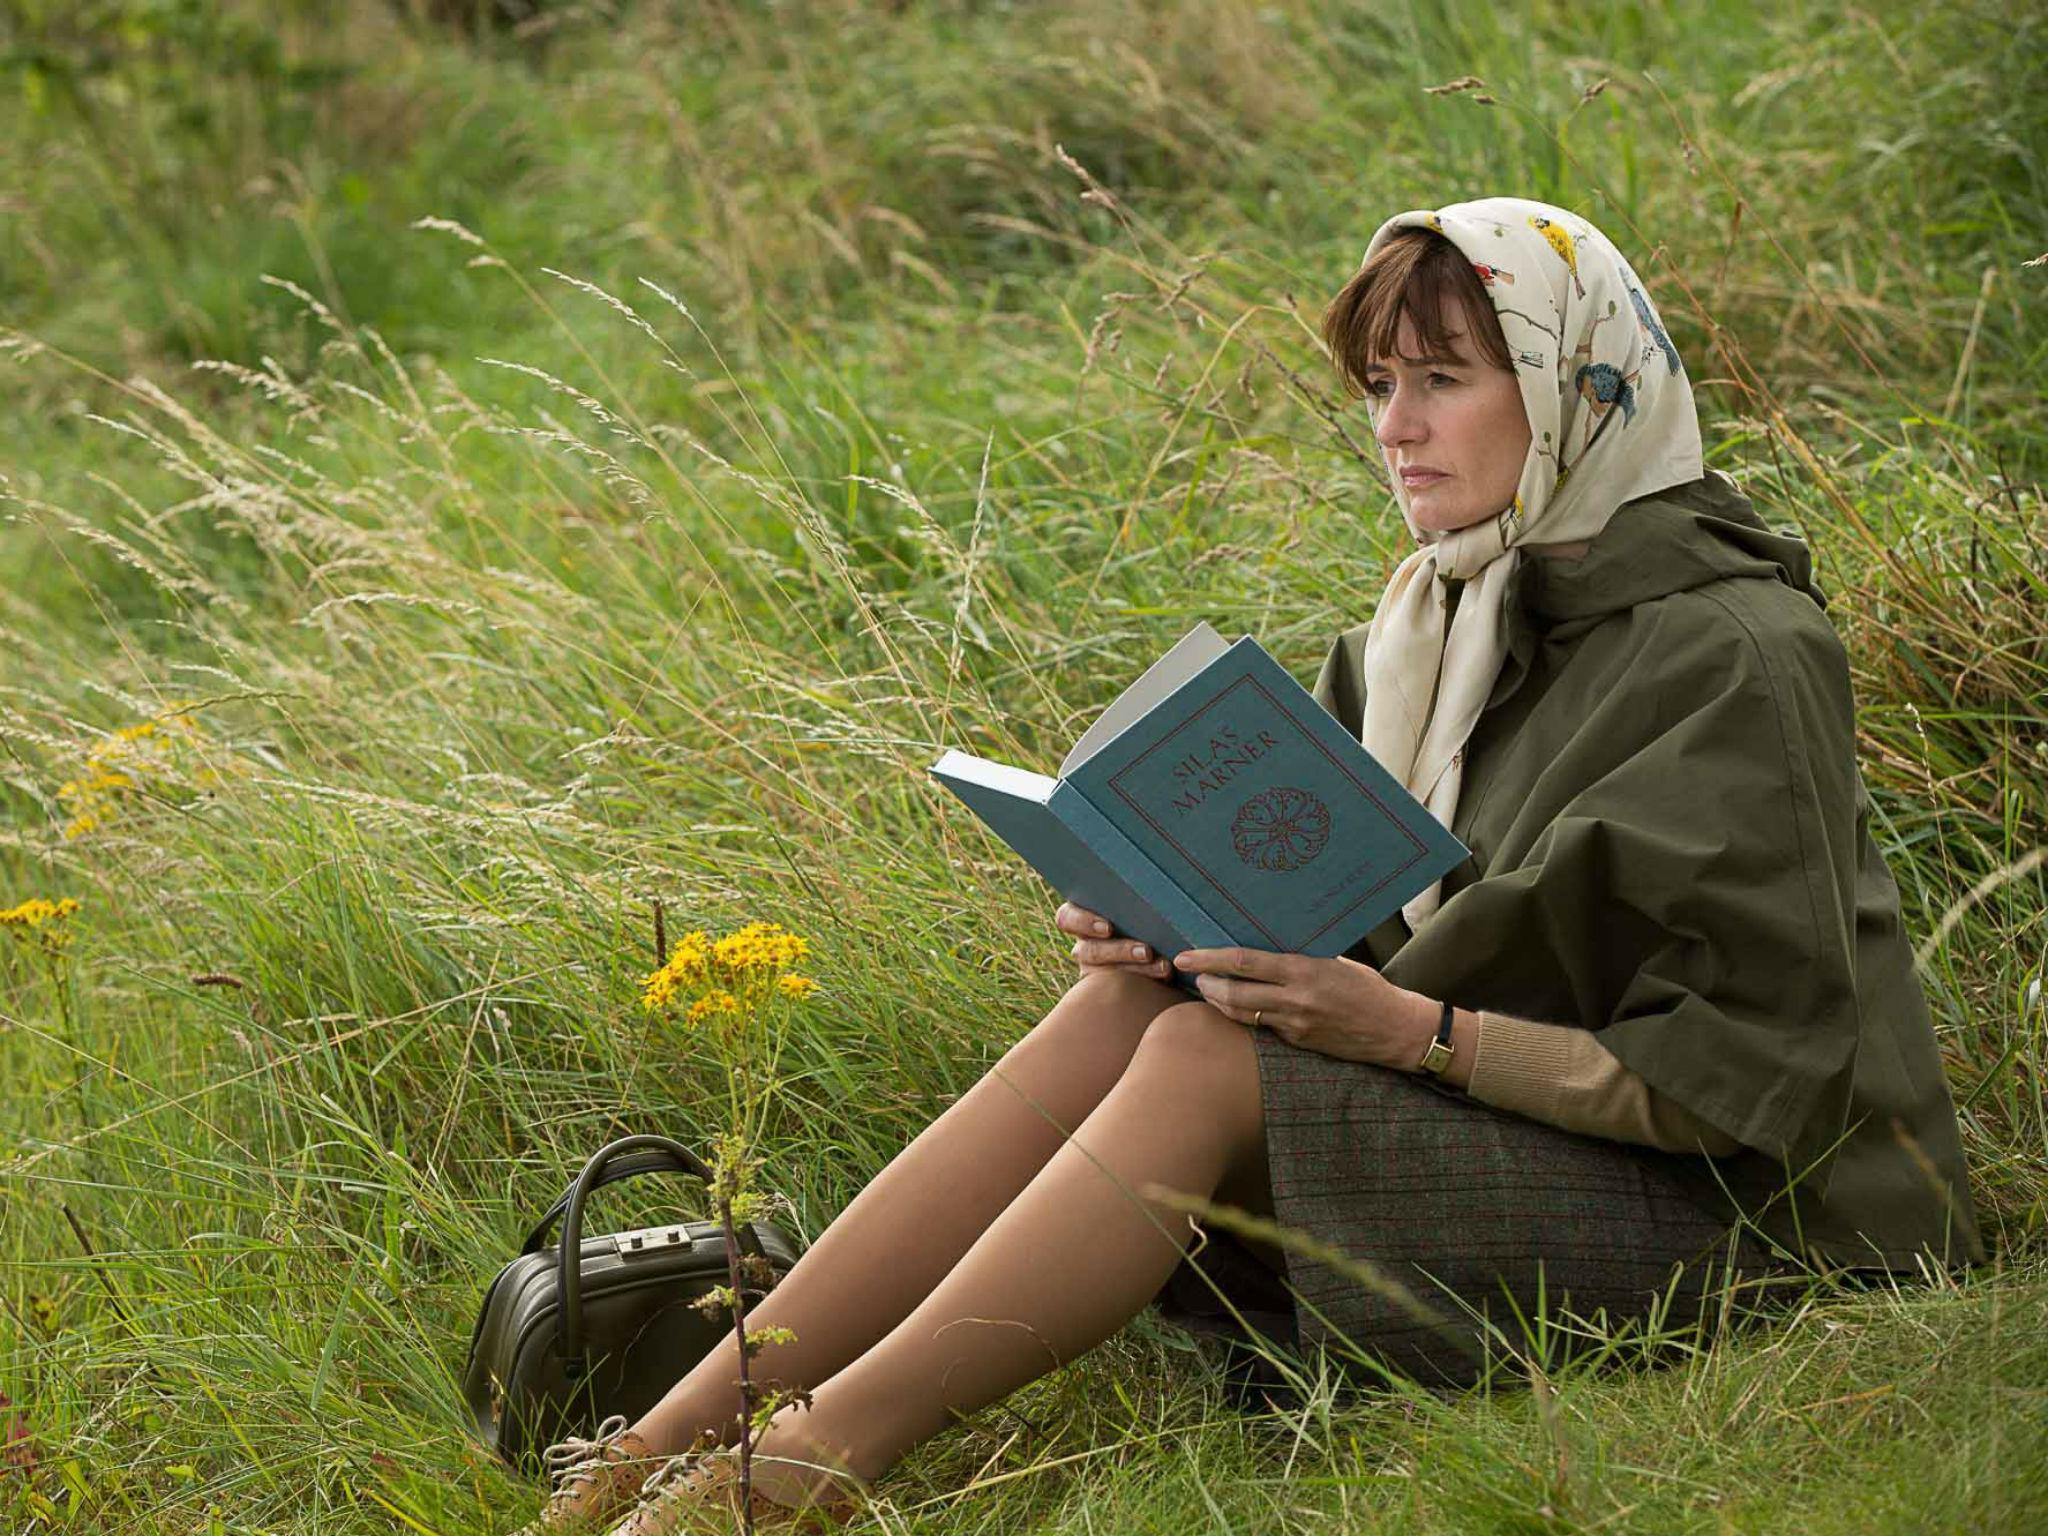 Emily Mortimer stars as a bookseller in ‘The Bookshop’ based on the novel by Penelope Fitzgerald